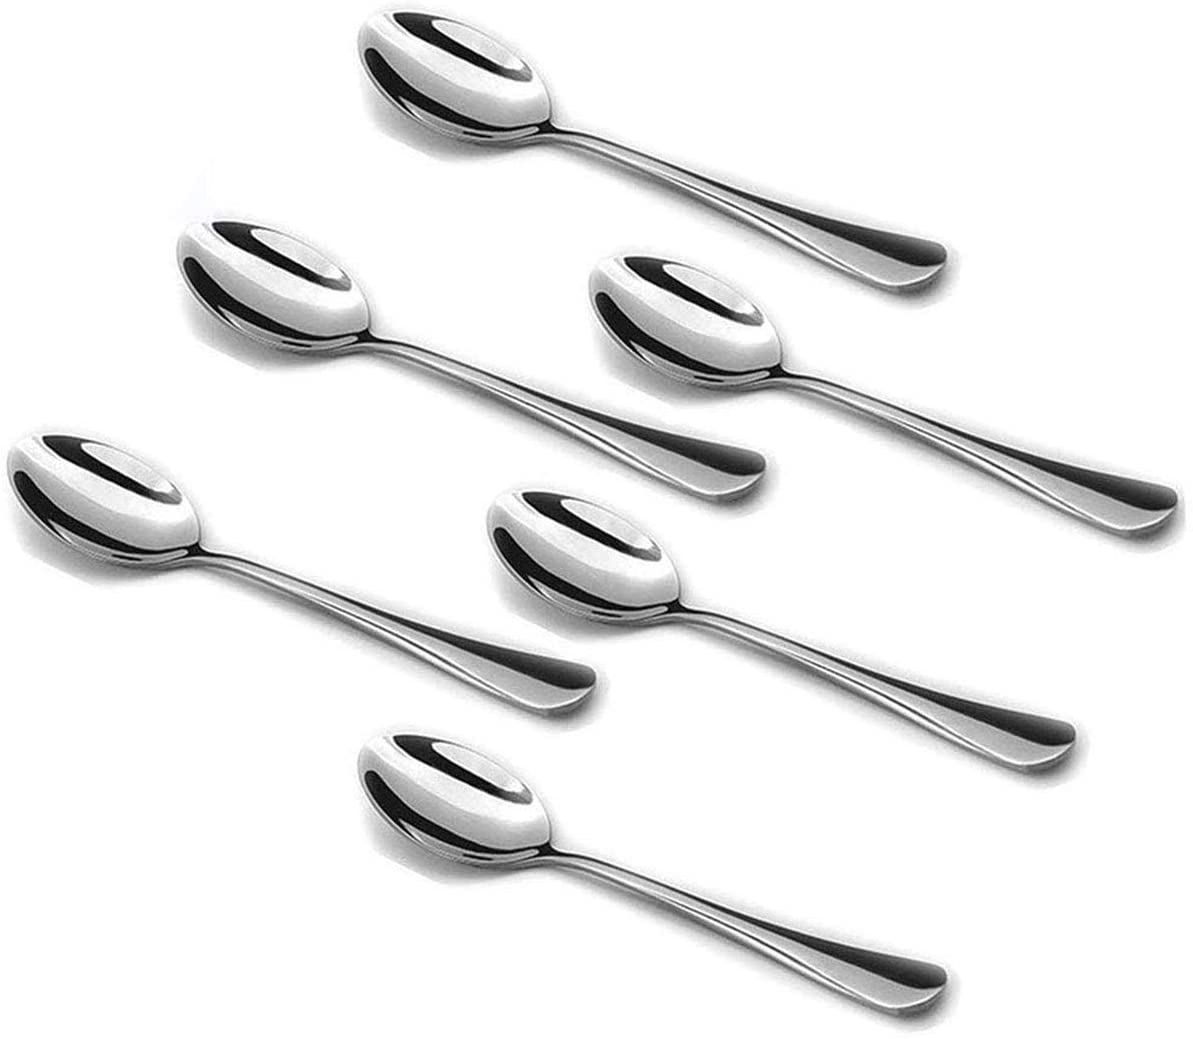 Wesdxc56 Demitasse Espresso Spoons, Mini Coffee Spoon, 4.7 Inches Stainless Steel Small Spoons for Dessert, Set of 6